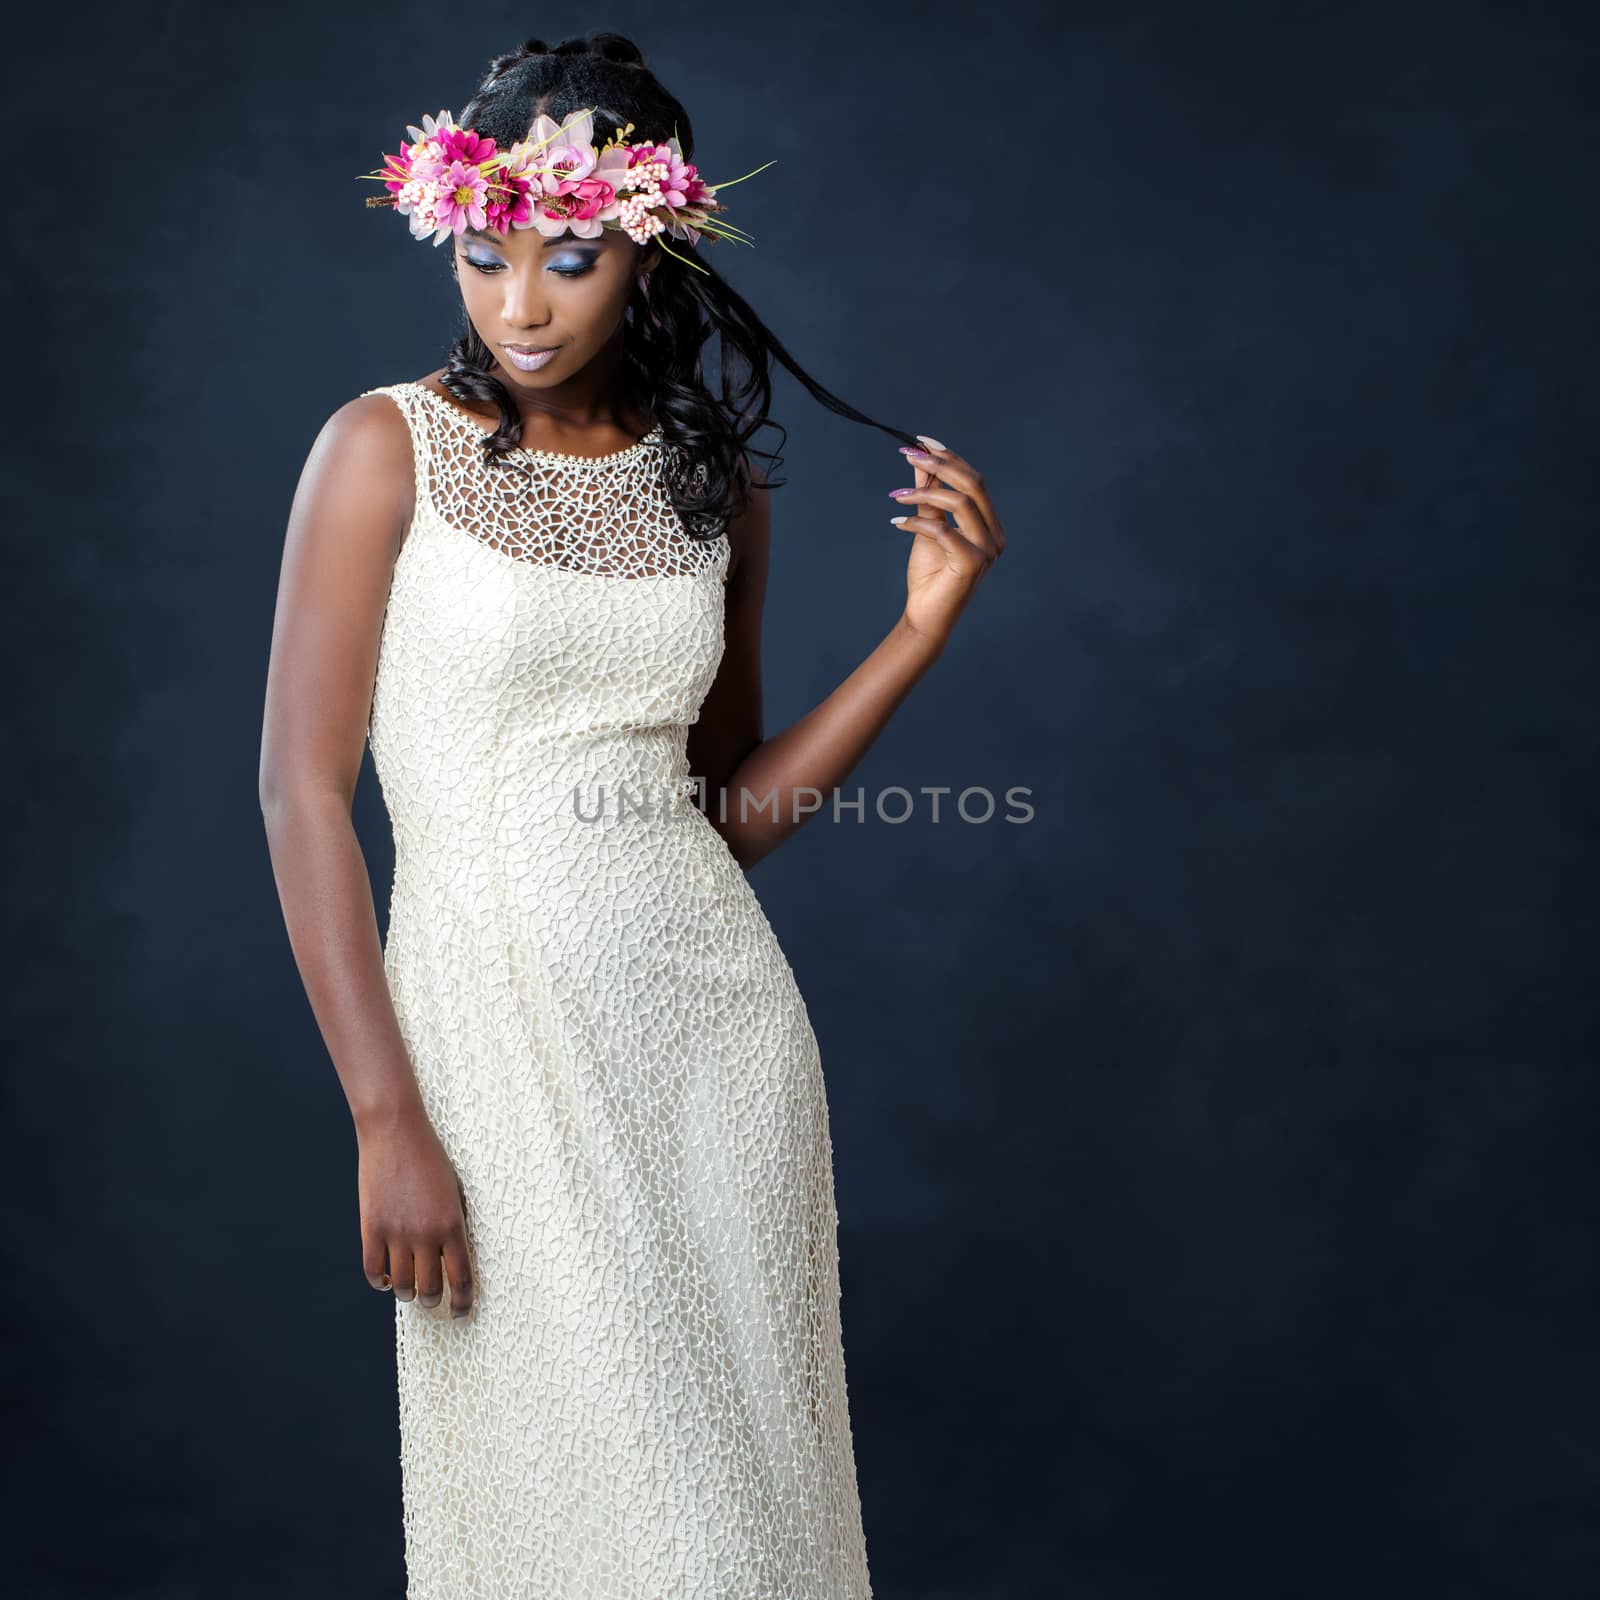 Stylish portrait of african bride with flower crown. by karelnoppe